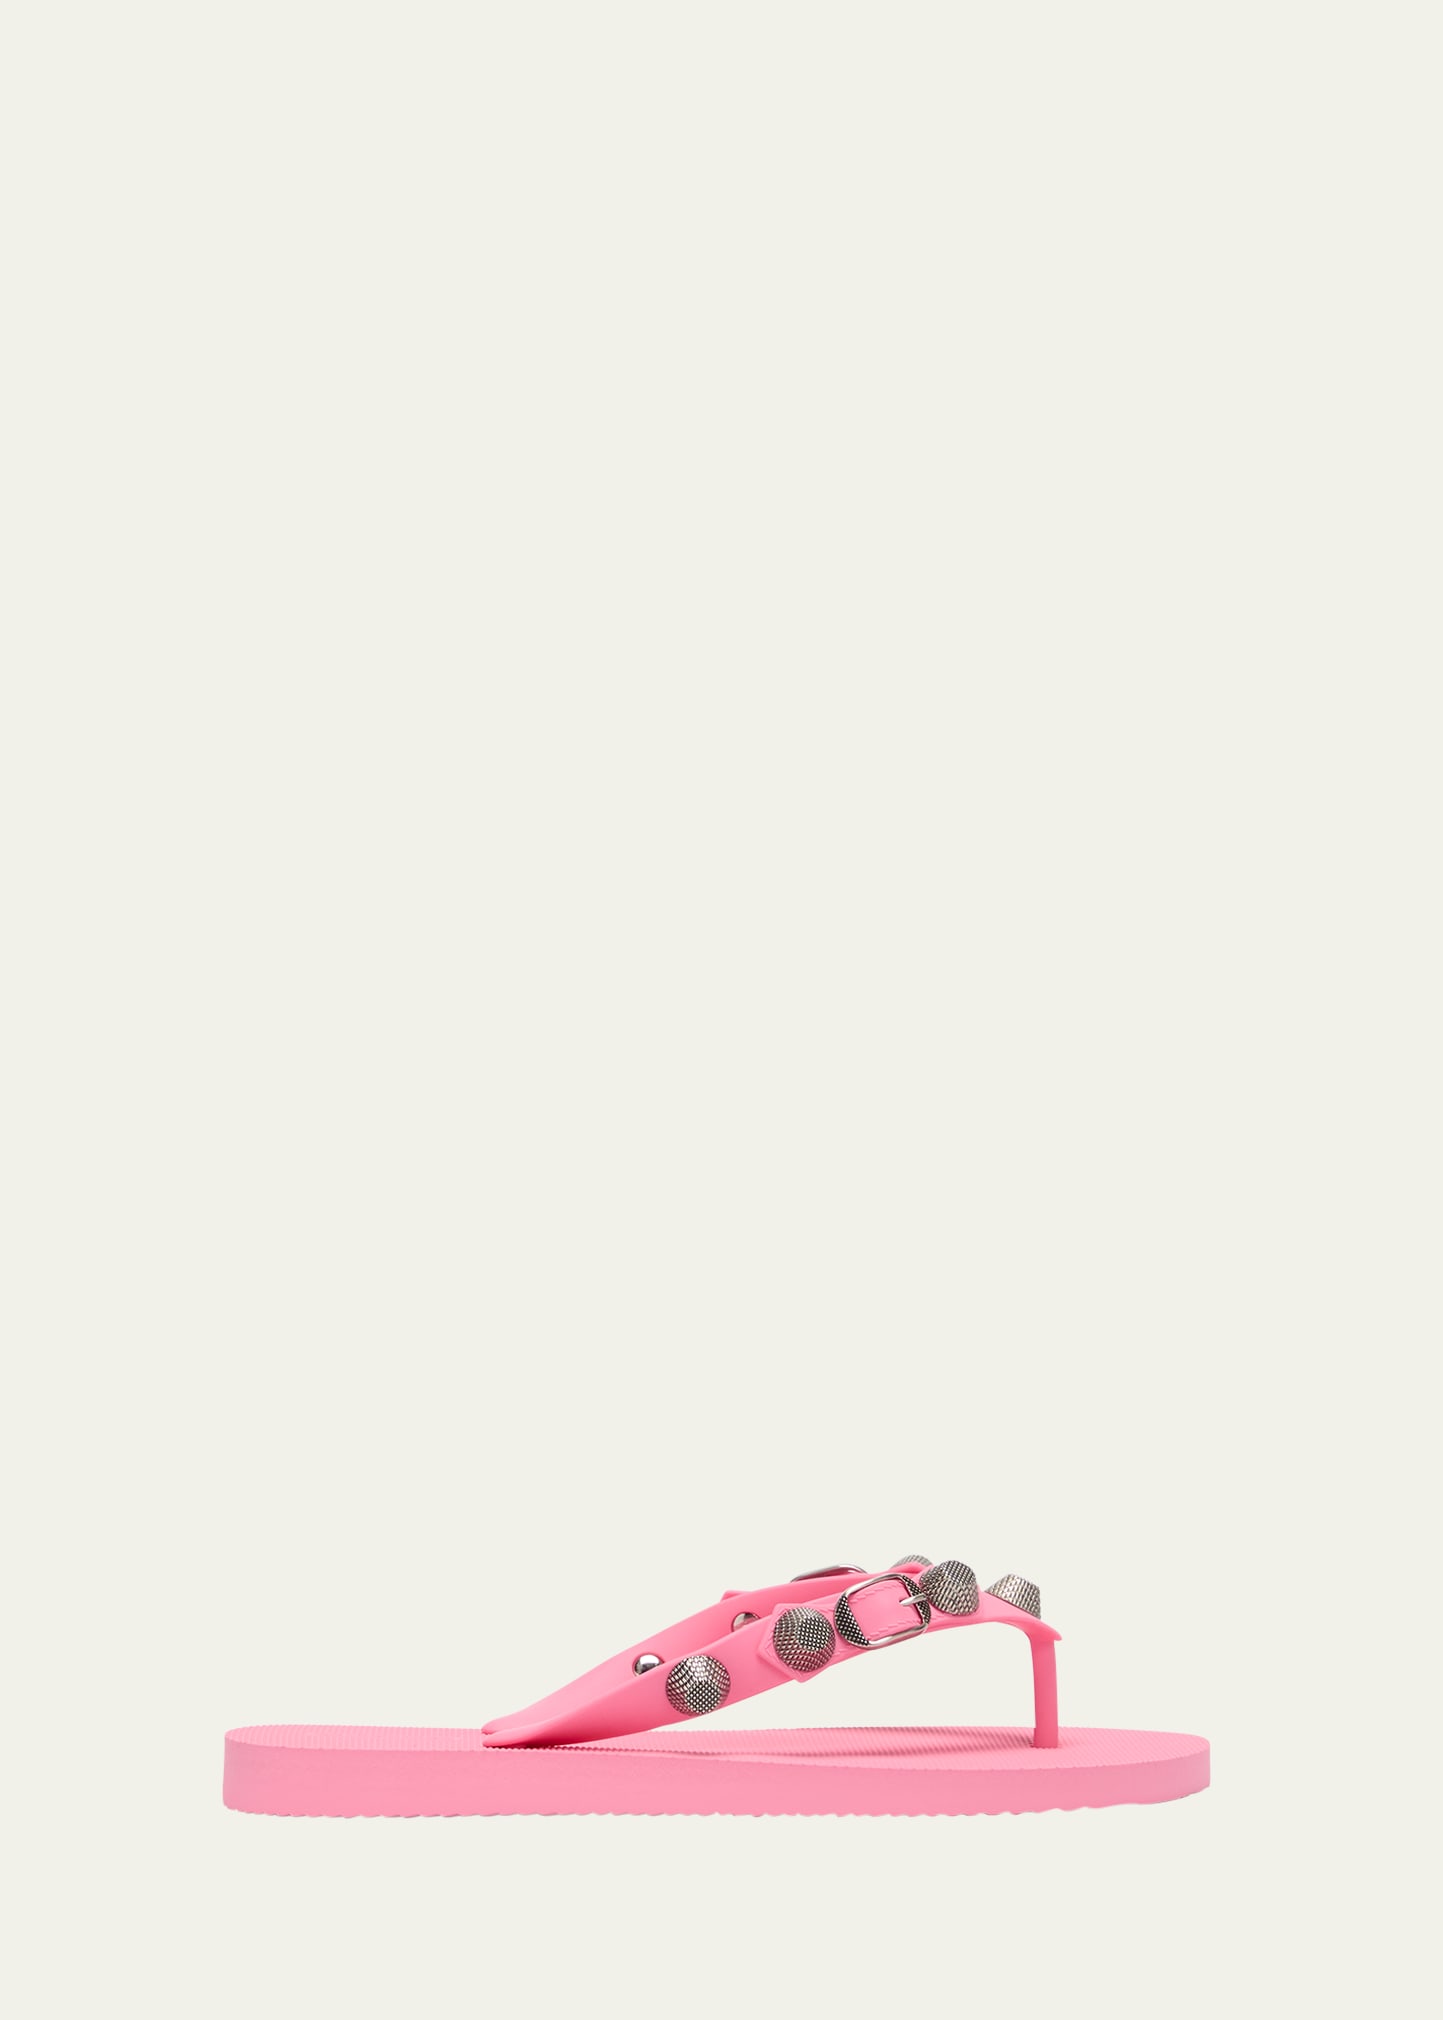 Balenciaga Cagole Studded Flip Flop Sandals In Pink